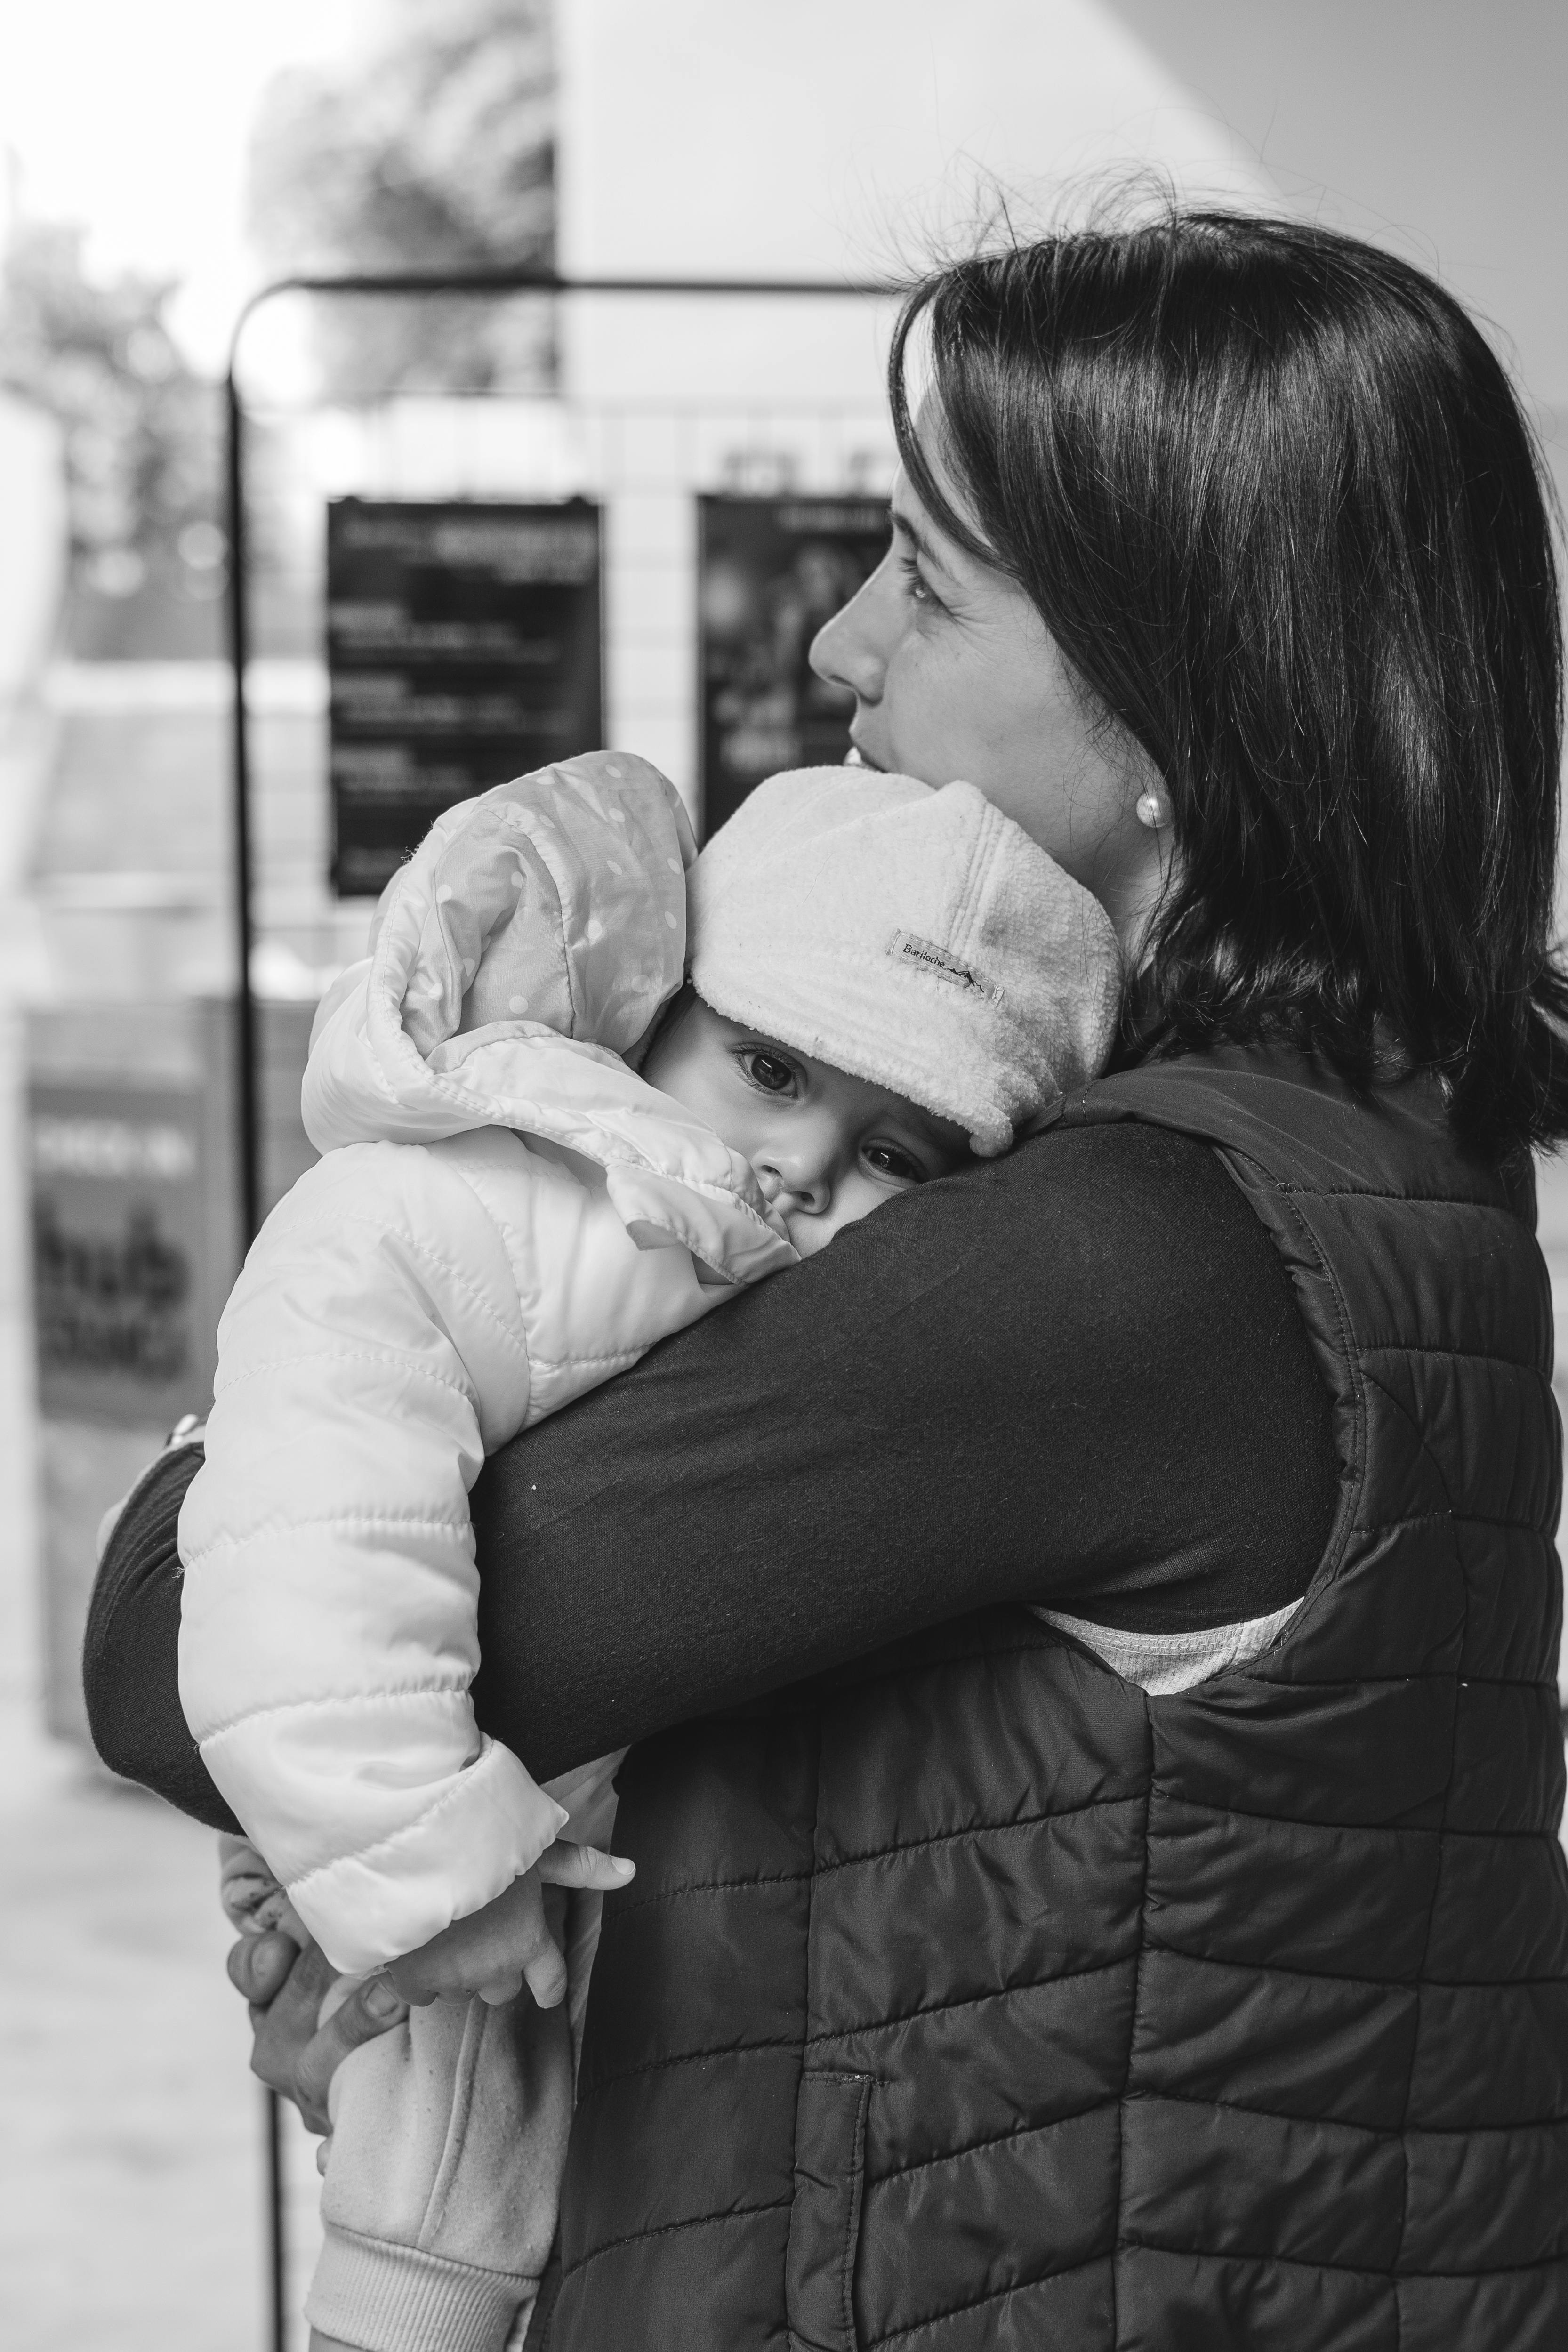 A woman with her child | Source: Pexels